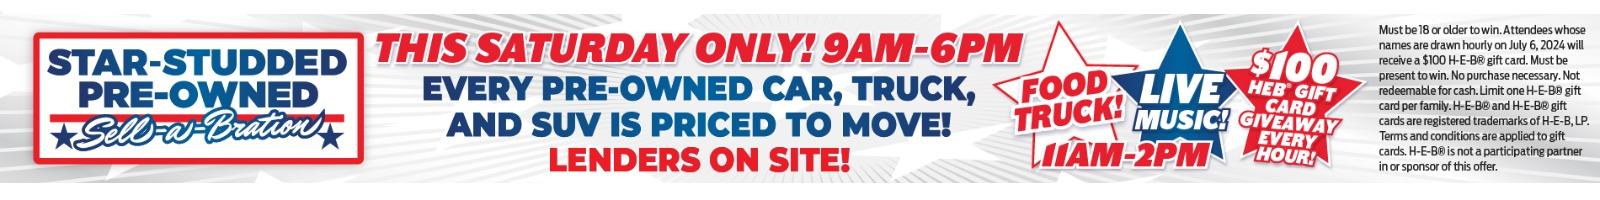 STAR-STUDDED PRE-OWNED ⭑Sell-a-Bration THIS SATURDAY ONLY! 9AM-6PM 
EVERY PRE-OWNED
CAR, TRUCK, AND SUV
IS PRICED TO MOVE!
LENDERS ON SITE!
FOOD TRUCK! LIVE MUSIC 11AM-2PM $100 HEB GIFT CARD GIVEAWAY EVERY HOUR